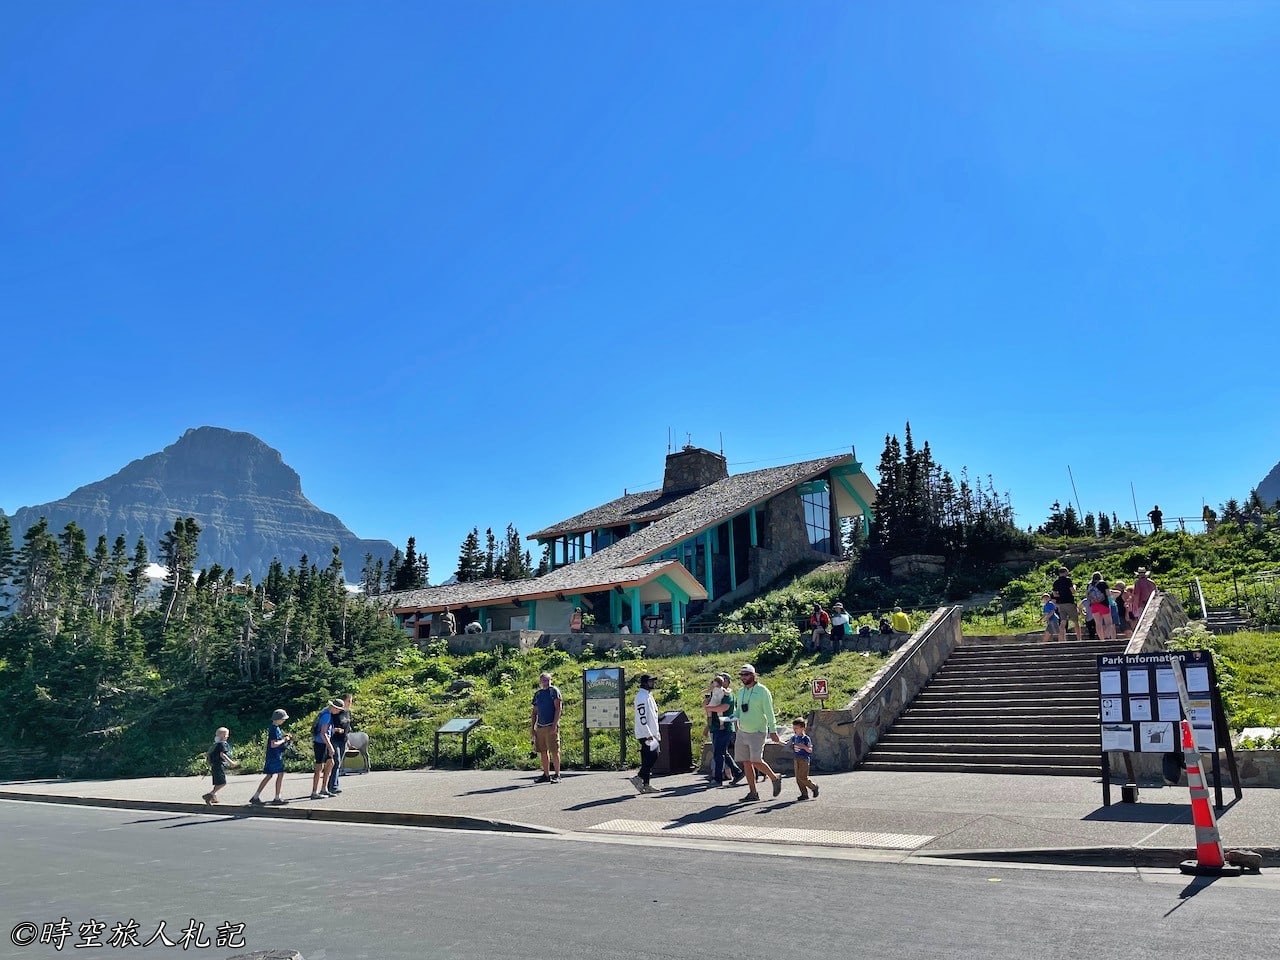 Logan Pass,Going-to-the-sun road 4